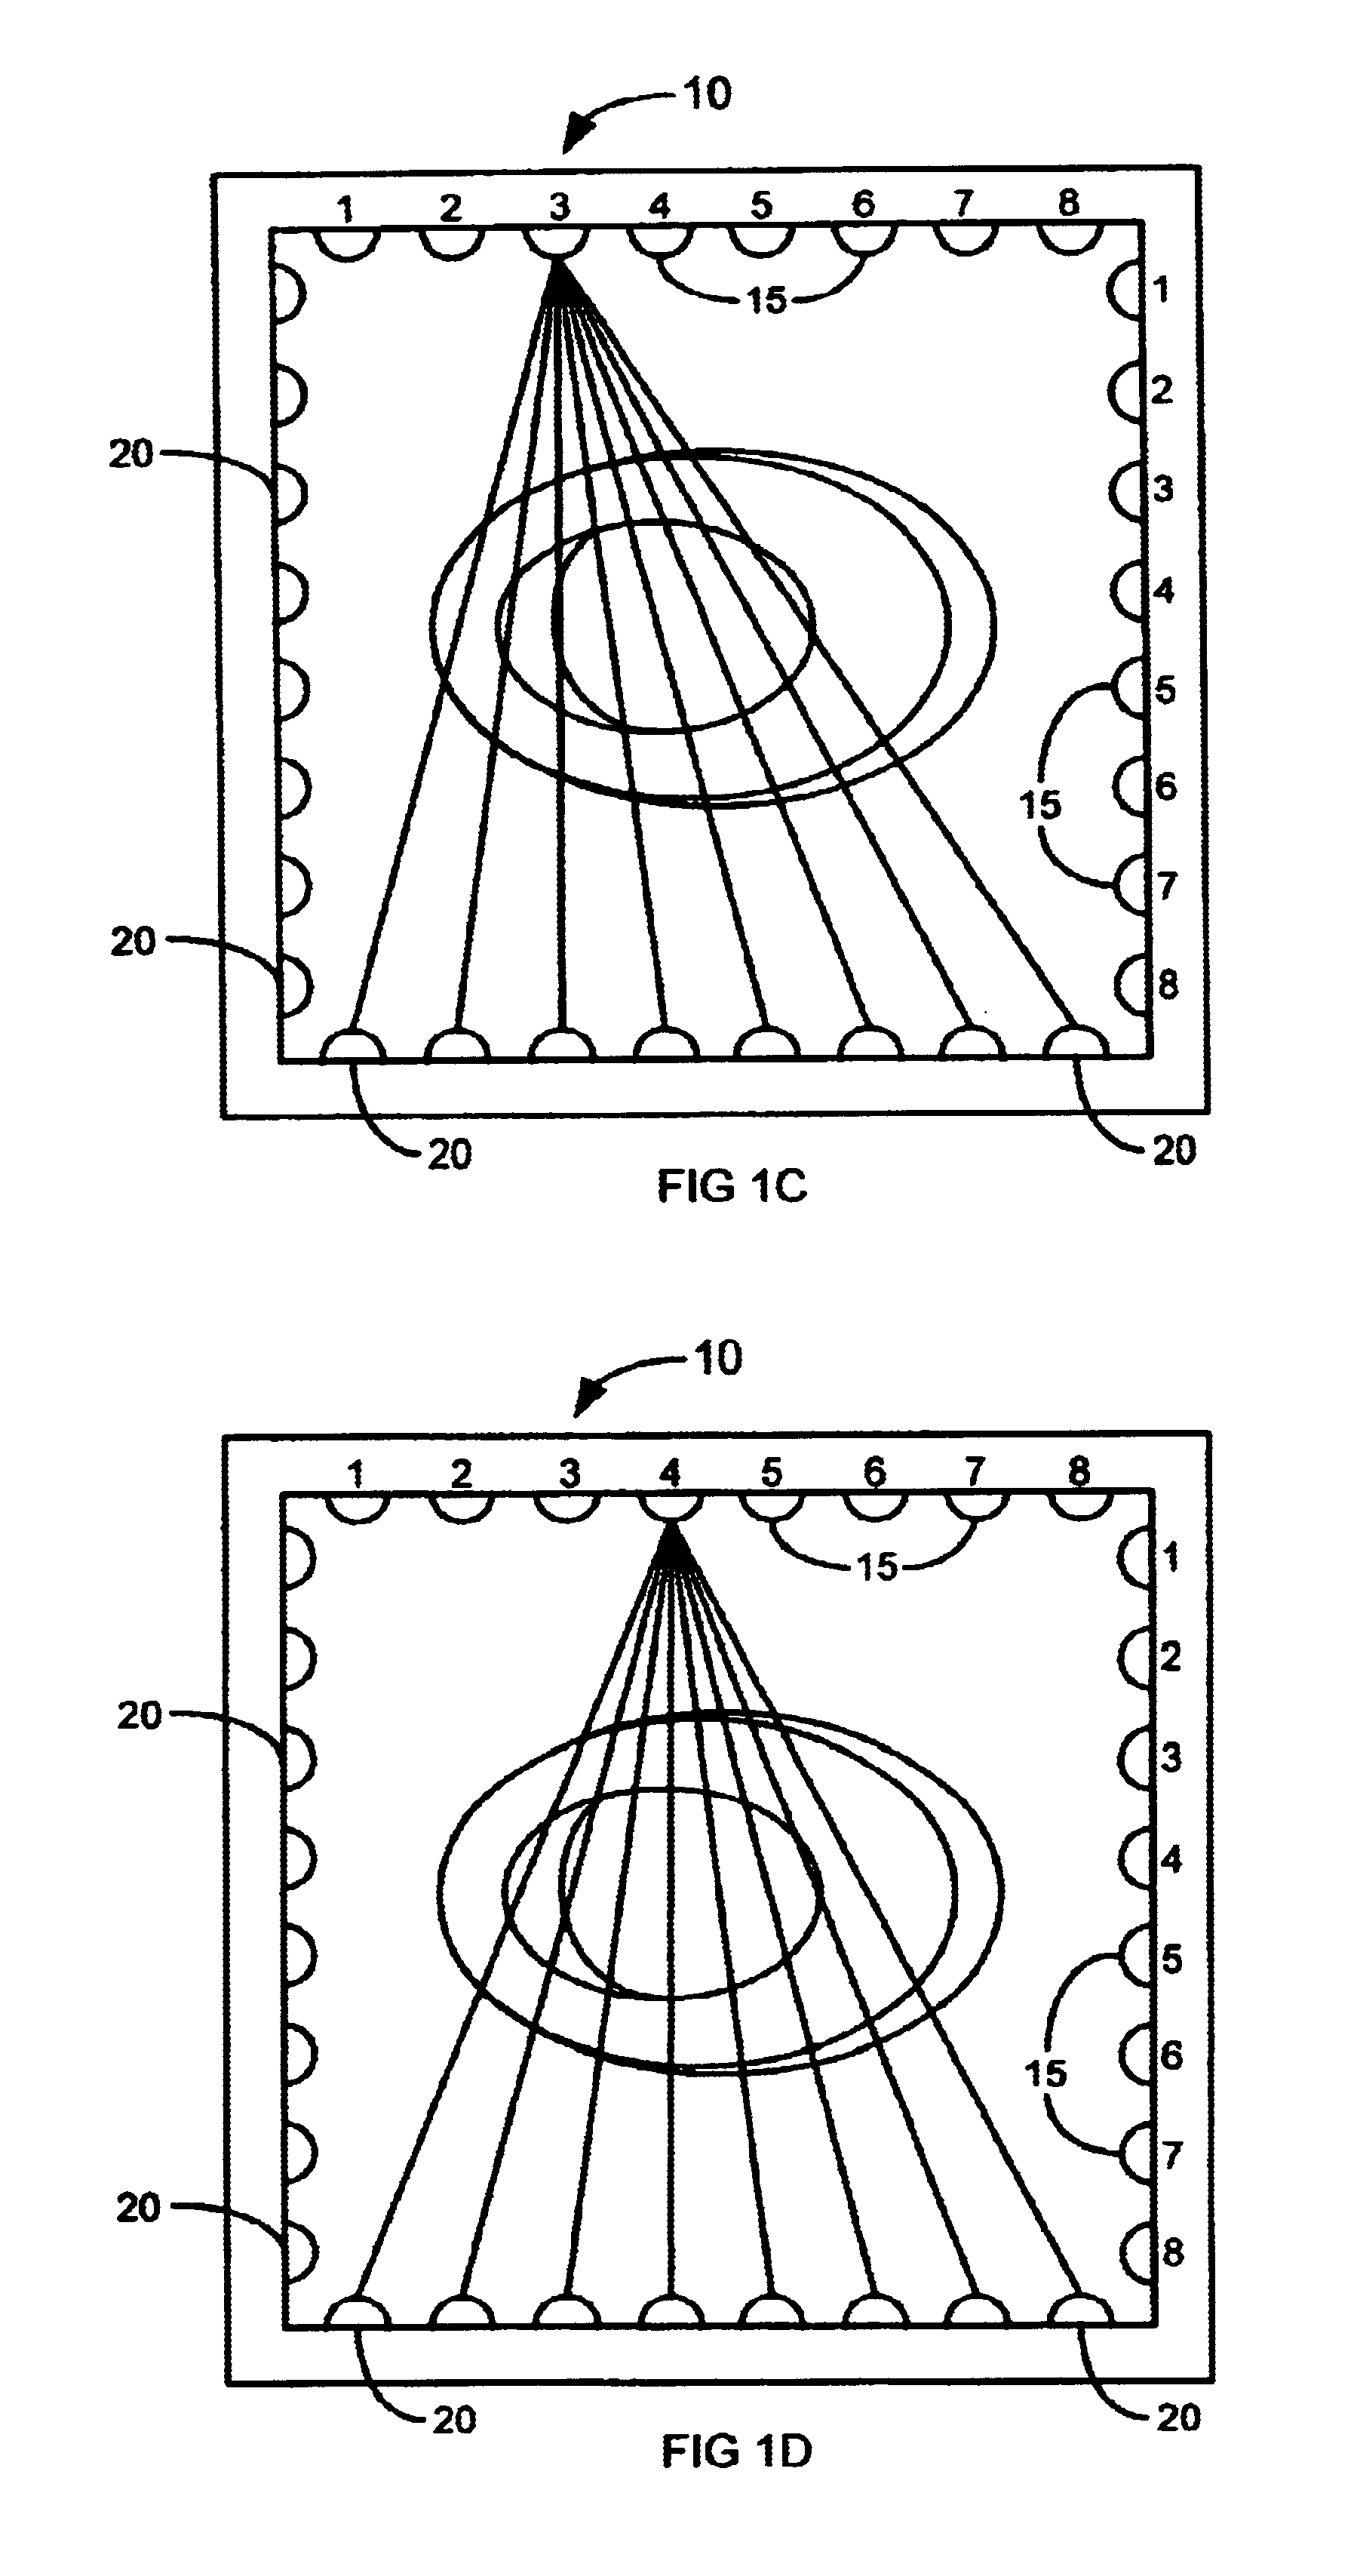 Ultra-wideband imaging system